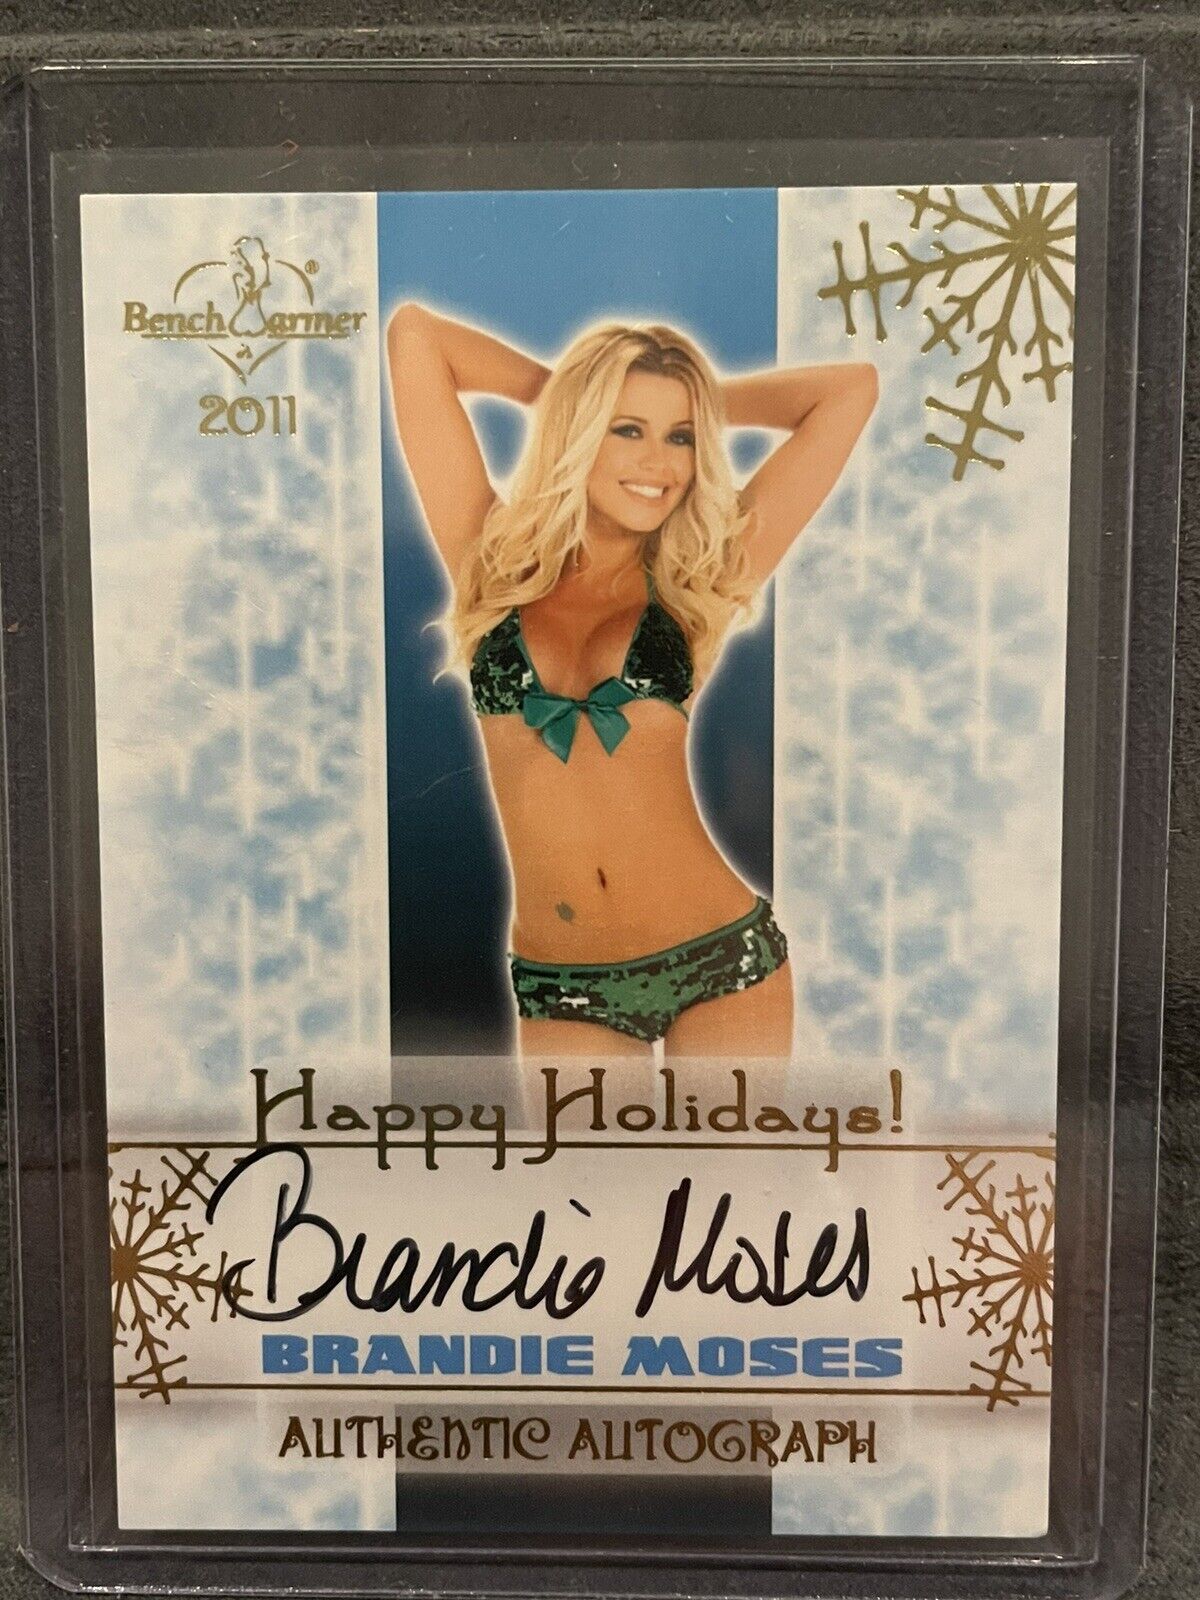 BRANDIE MOSES 2011 BenchWarmer Signed HAPPY HOLIDAYS Authentic Autograph